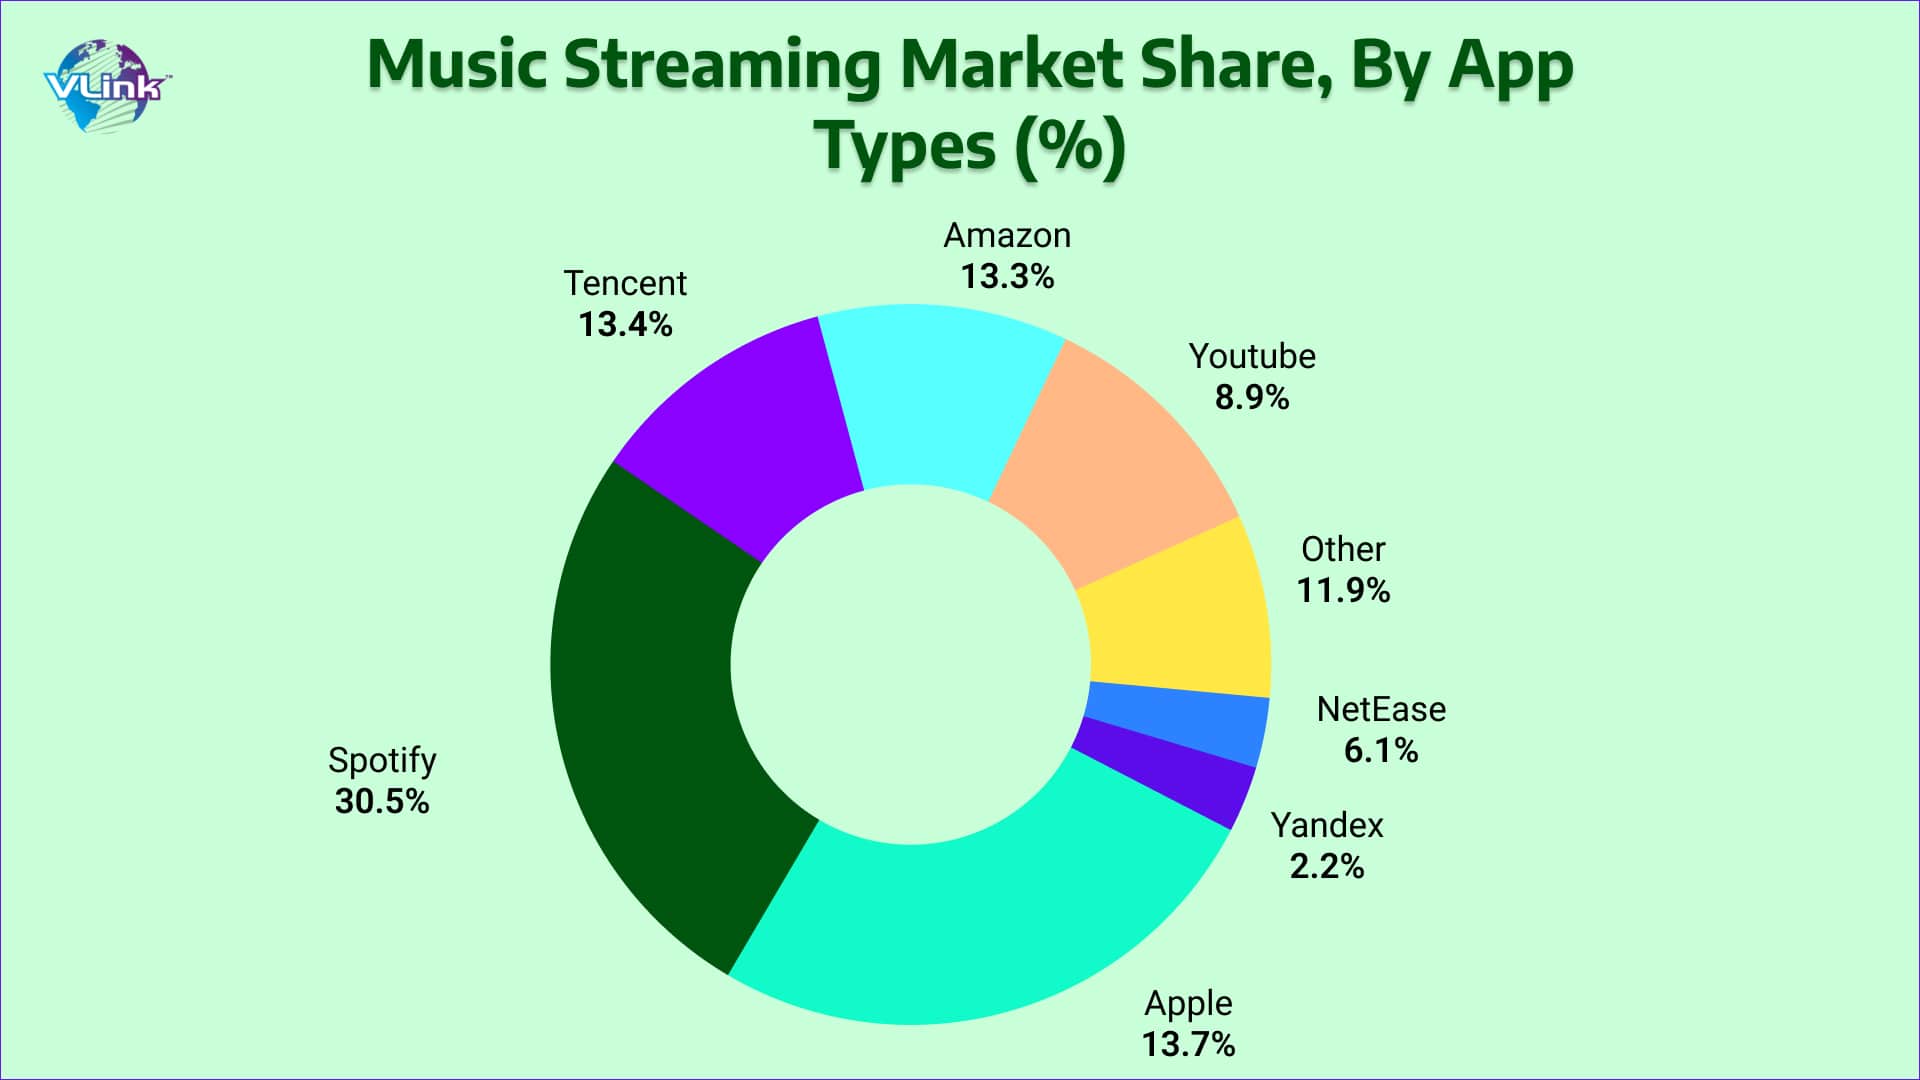 Music Streaming Market Share By App Types